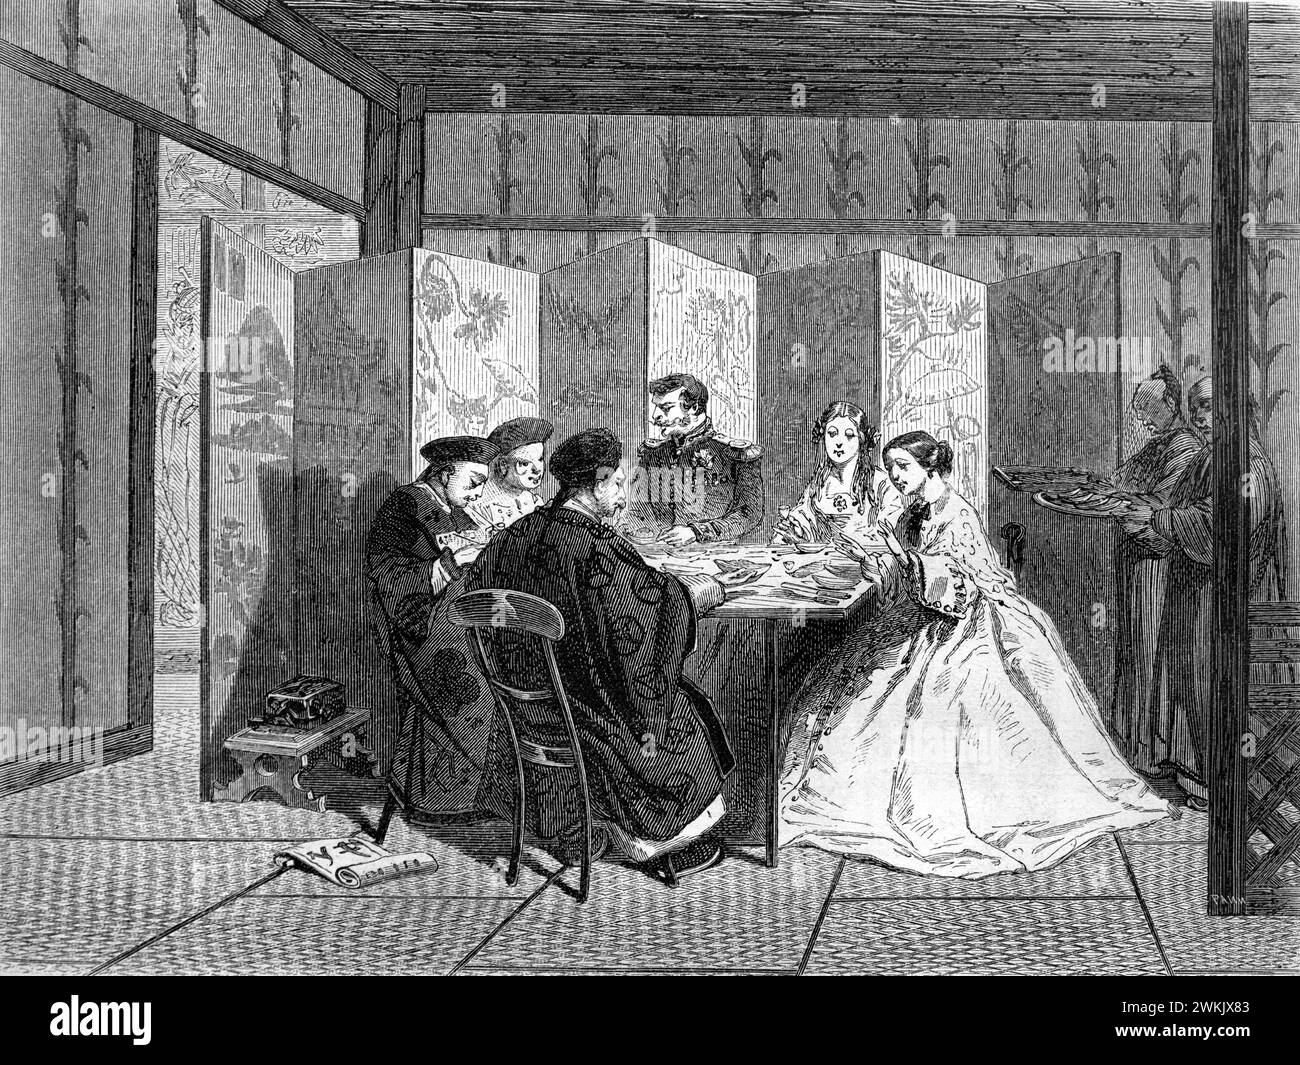 Chinese Traders, Businessmen or Officials Receive Russian Officer, Border Control Officer or Customs Officer and Two Russian Women for a Chinese Meal in Kyakhta on the Mongolia-Russia Border, Republic of Buryatia, Russia. Vintage or Historic Engraving or Illustration 1863 Stock Photo